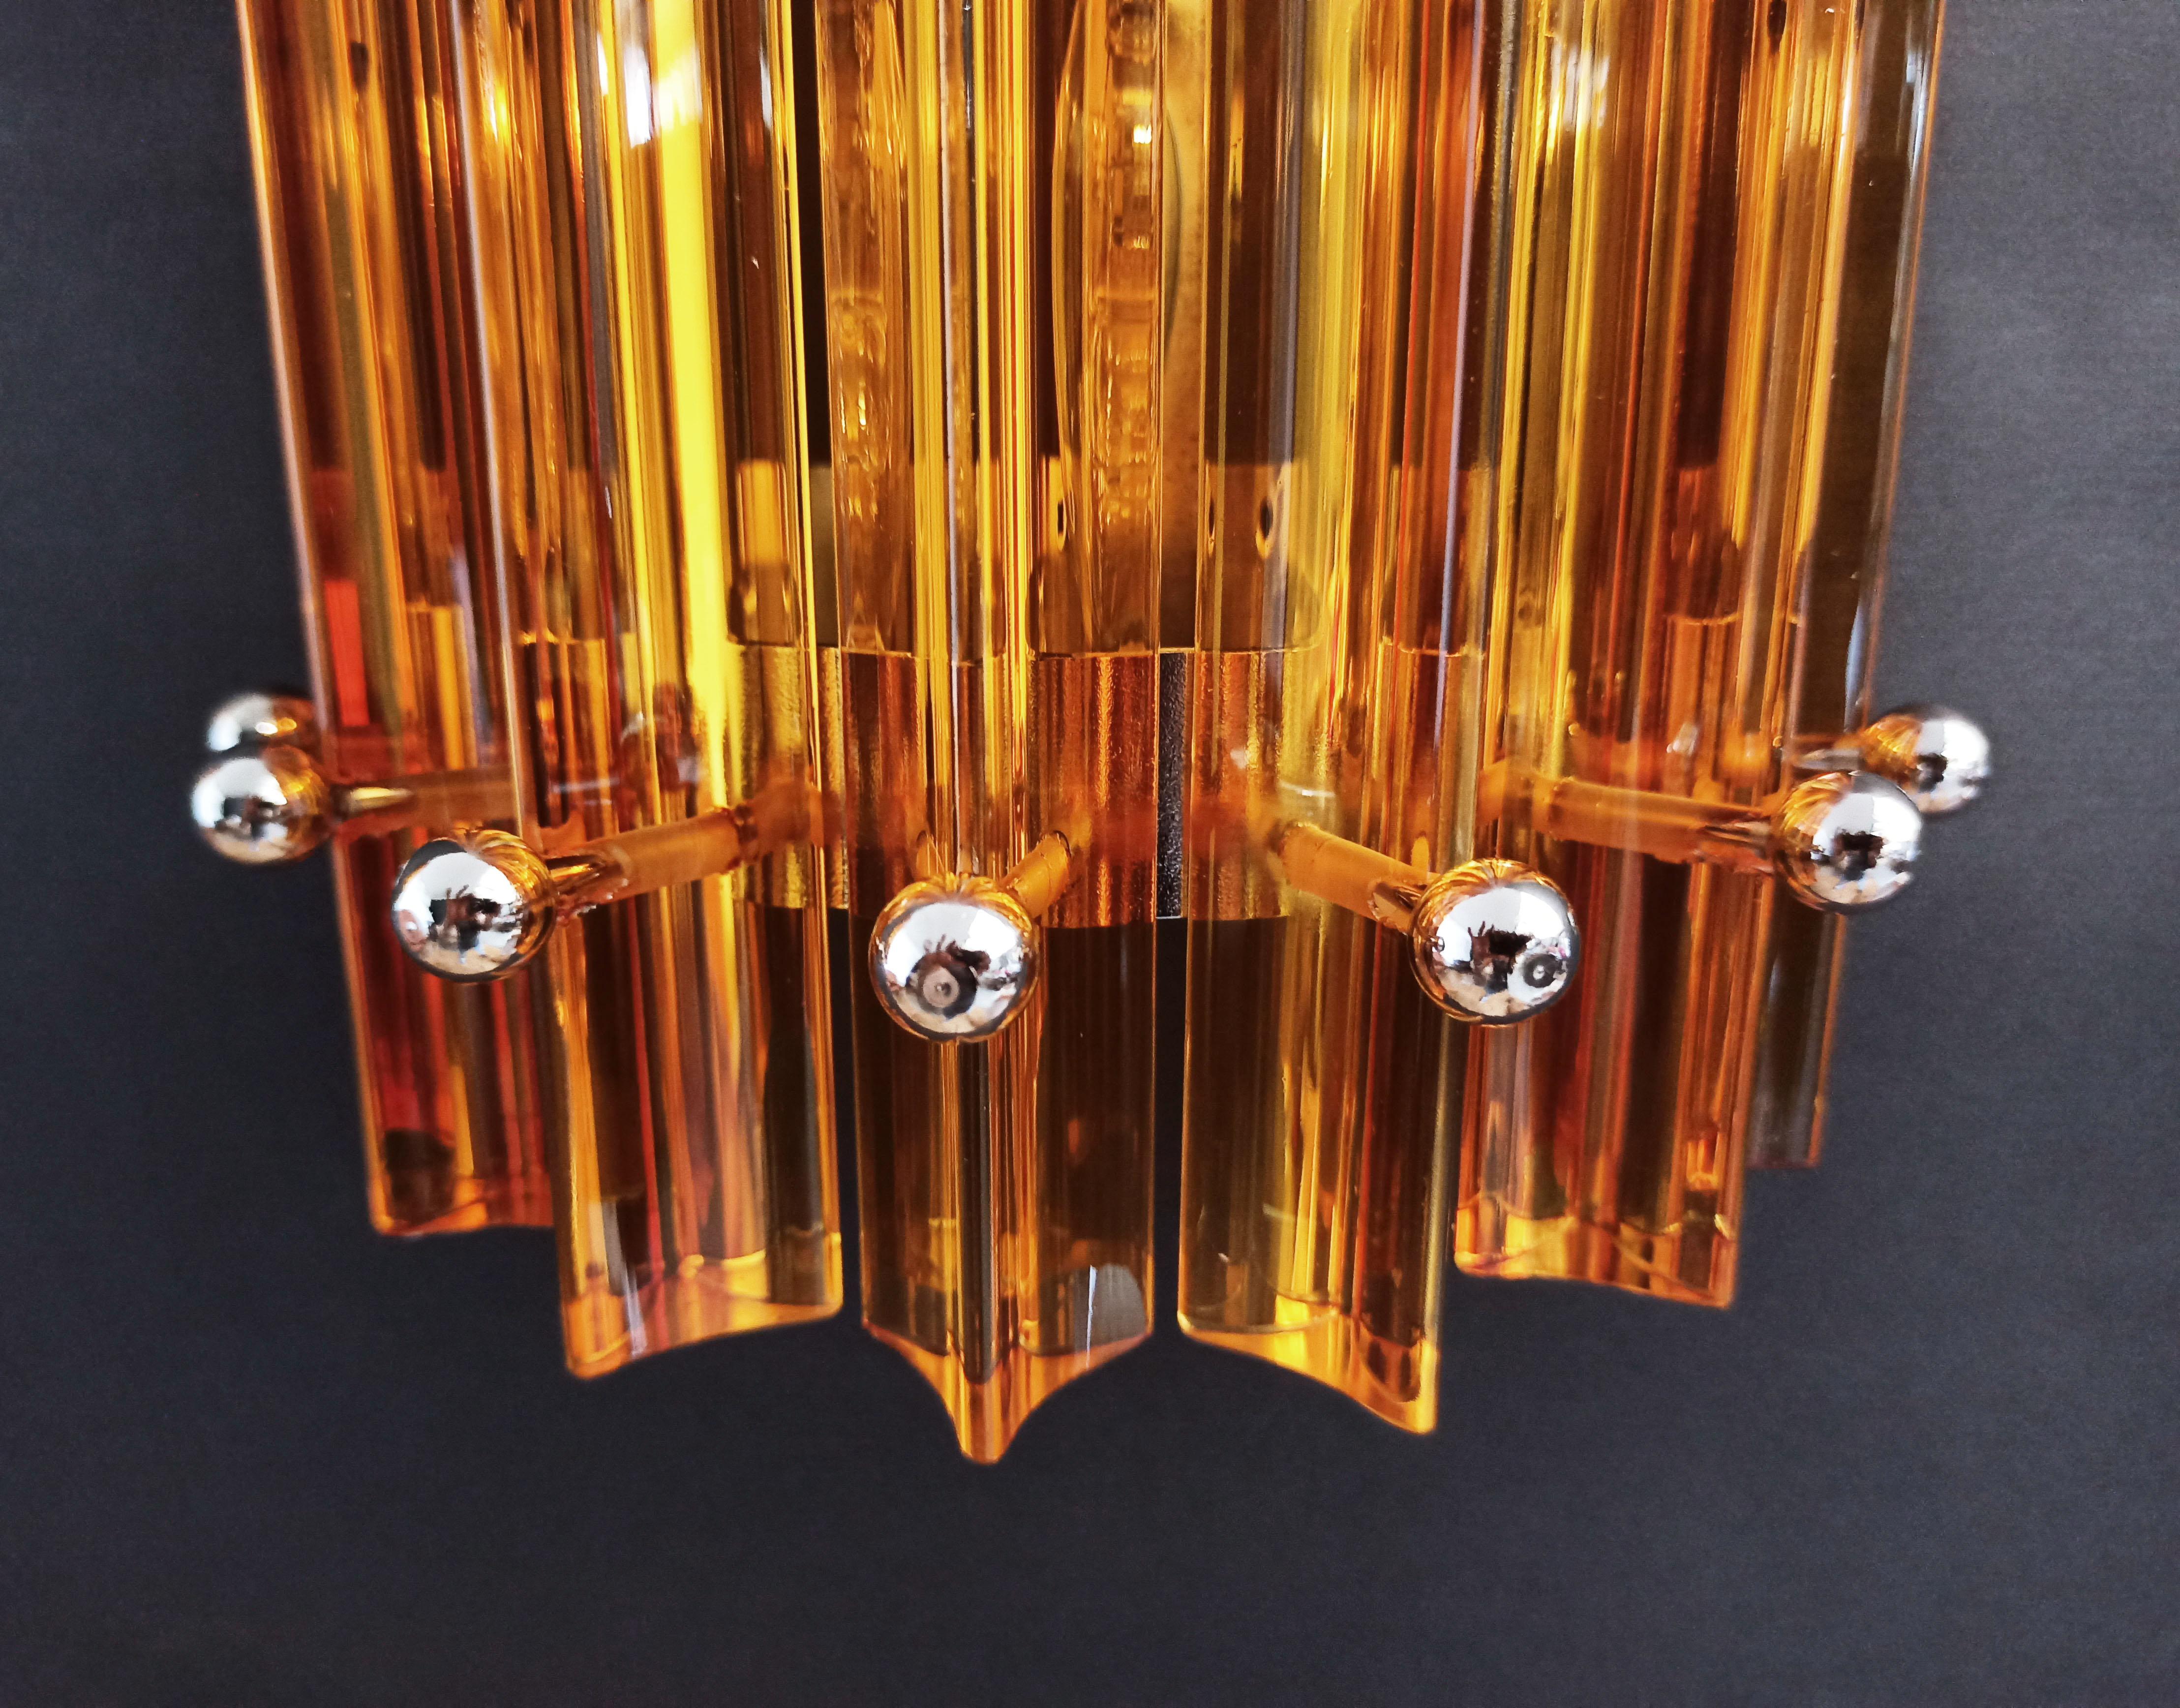 Trio vintage Murano wall sconce, amber triedri, column Mariangela model
Fantastic Trio of vintage Murano wall sconce made by 6 Murano crystal prism (triedri) for each appliqué in a chrome metal frame. The shape of this sconce is column. The glasses